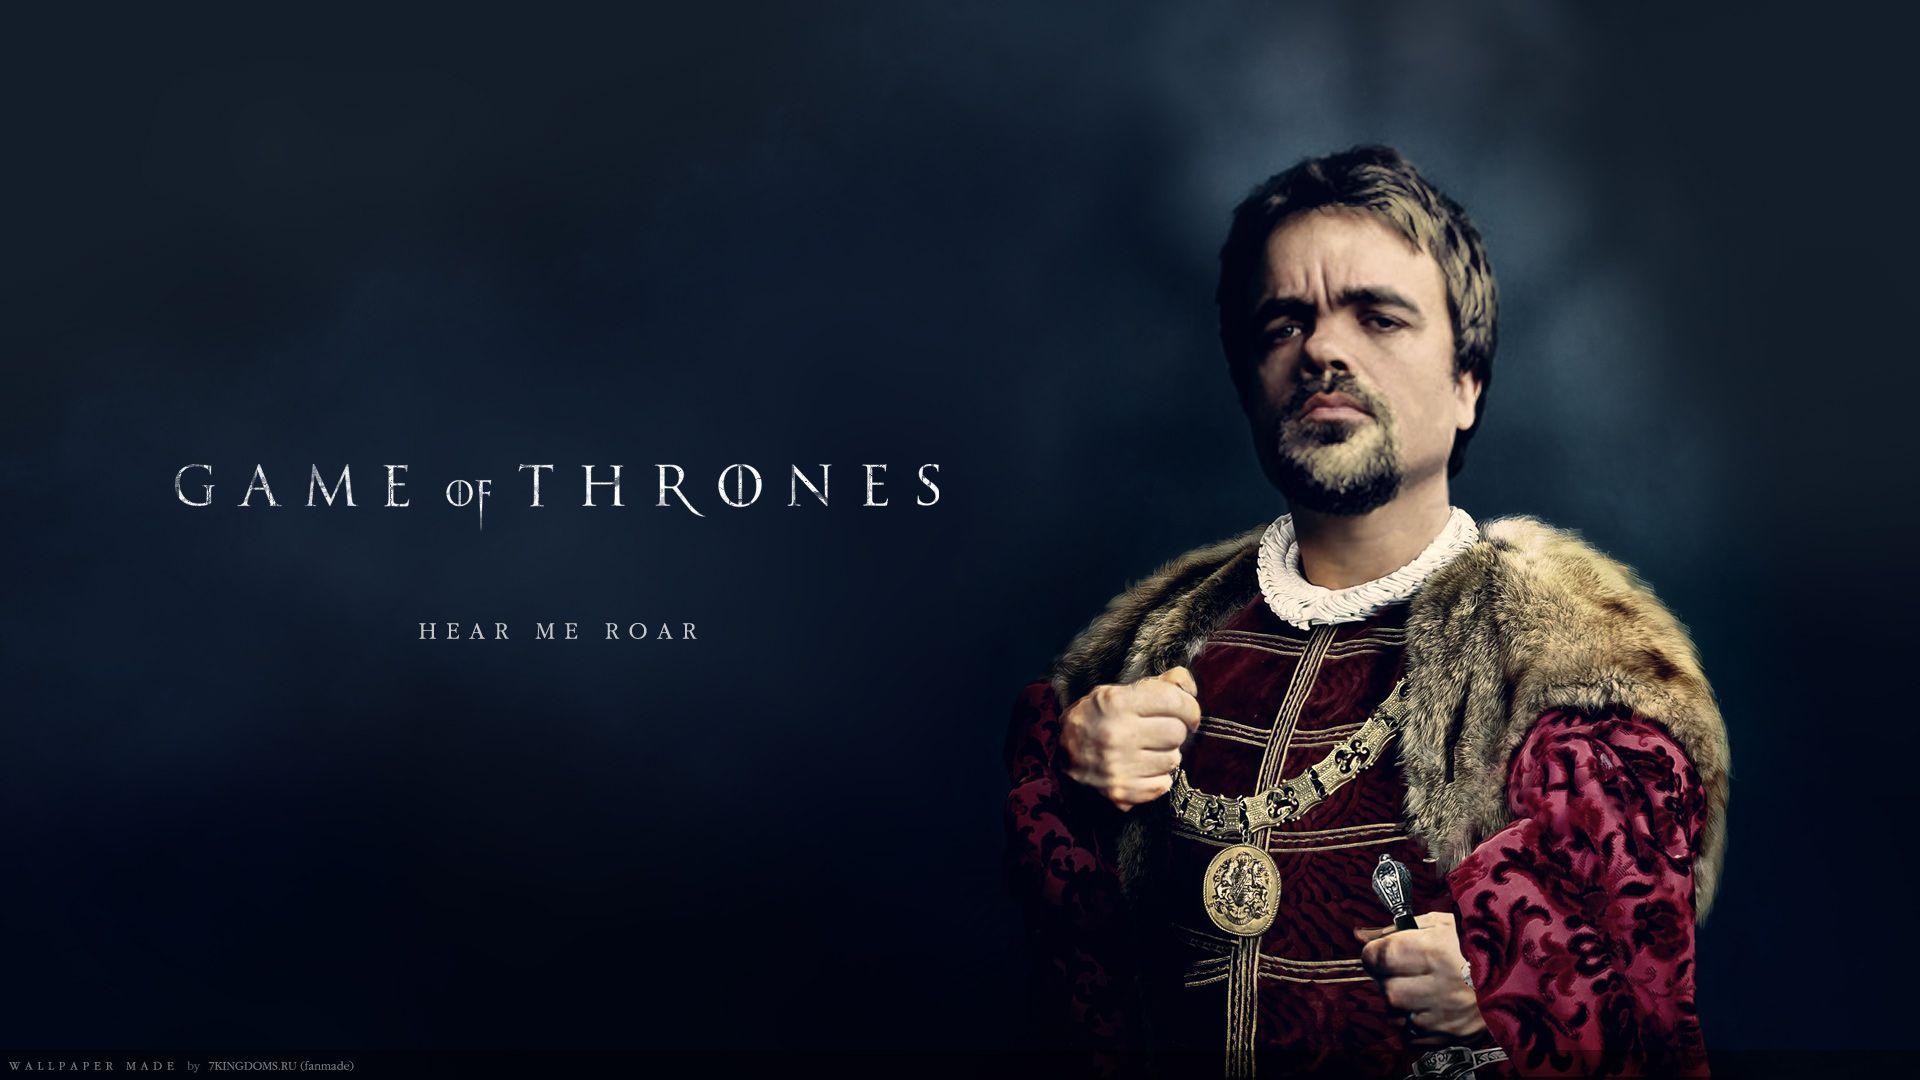 Game of Thrones, TV Series, Tyrion Lannister, Peter Dinklage, swag